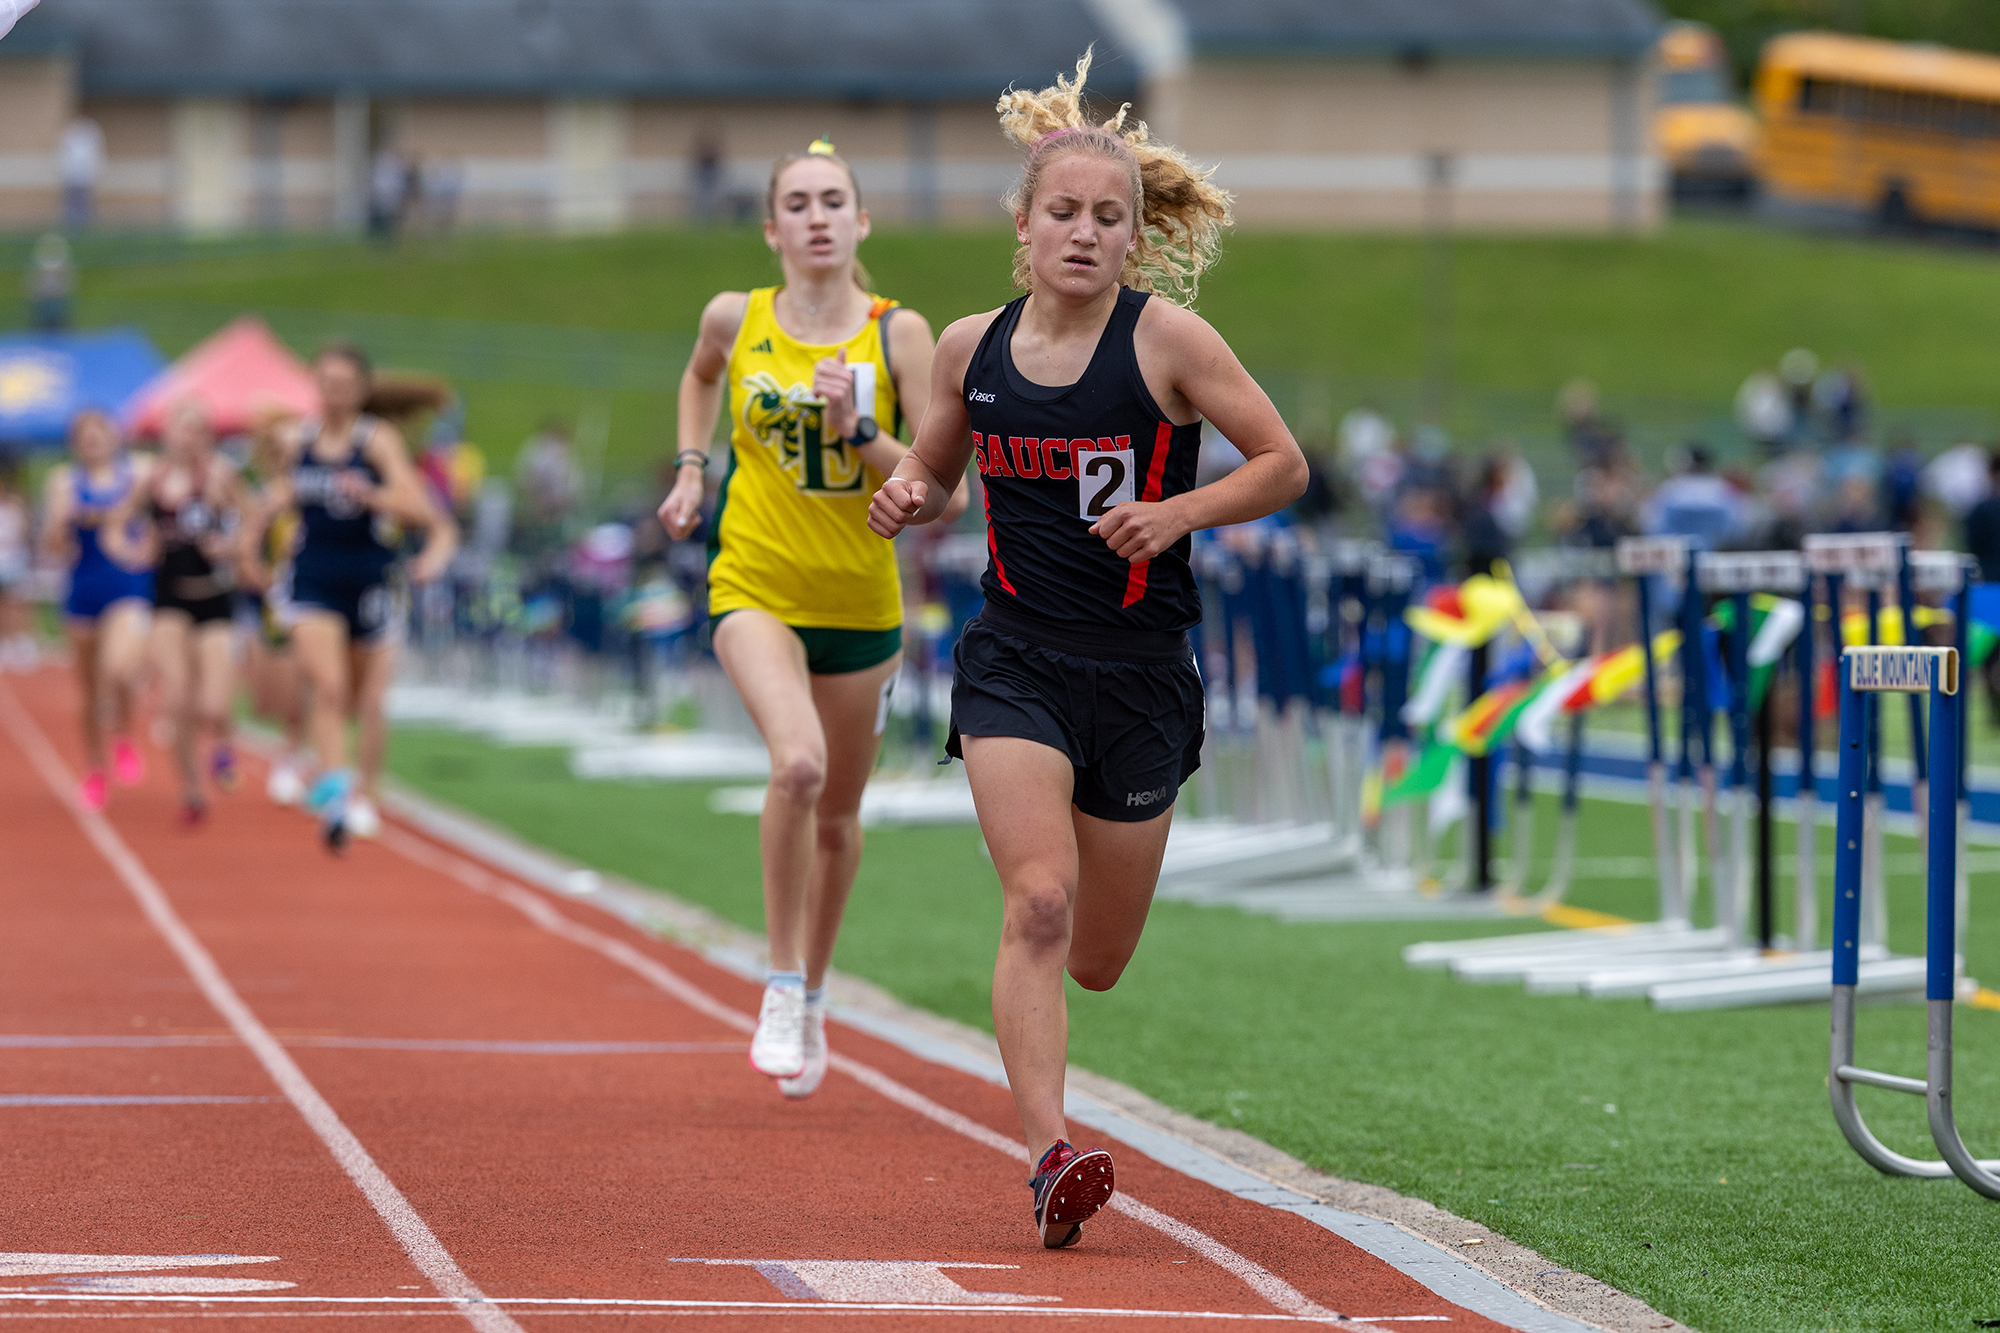 Saucon Valley's Kraus learns her lesson, holds off McCartney at D 